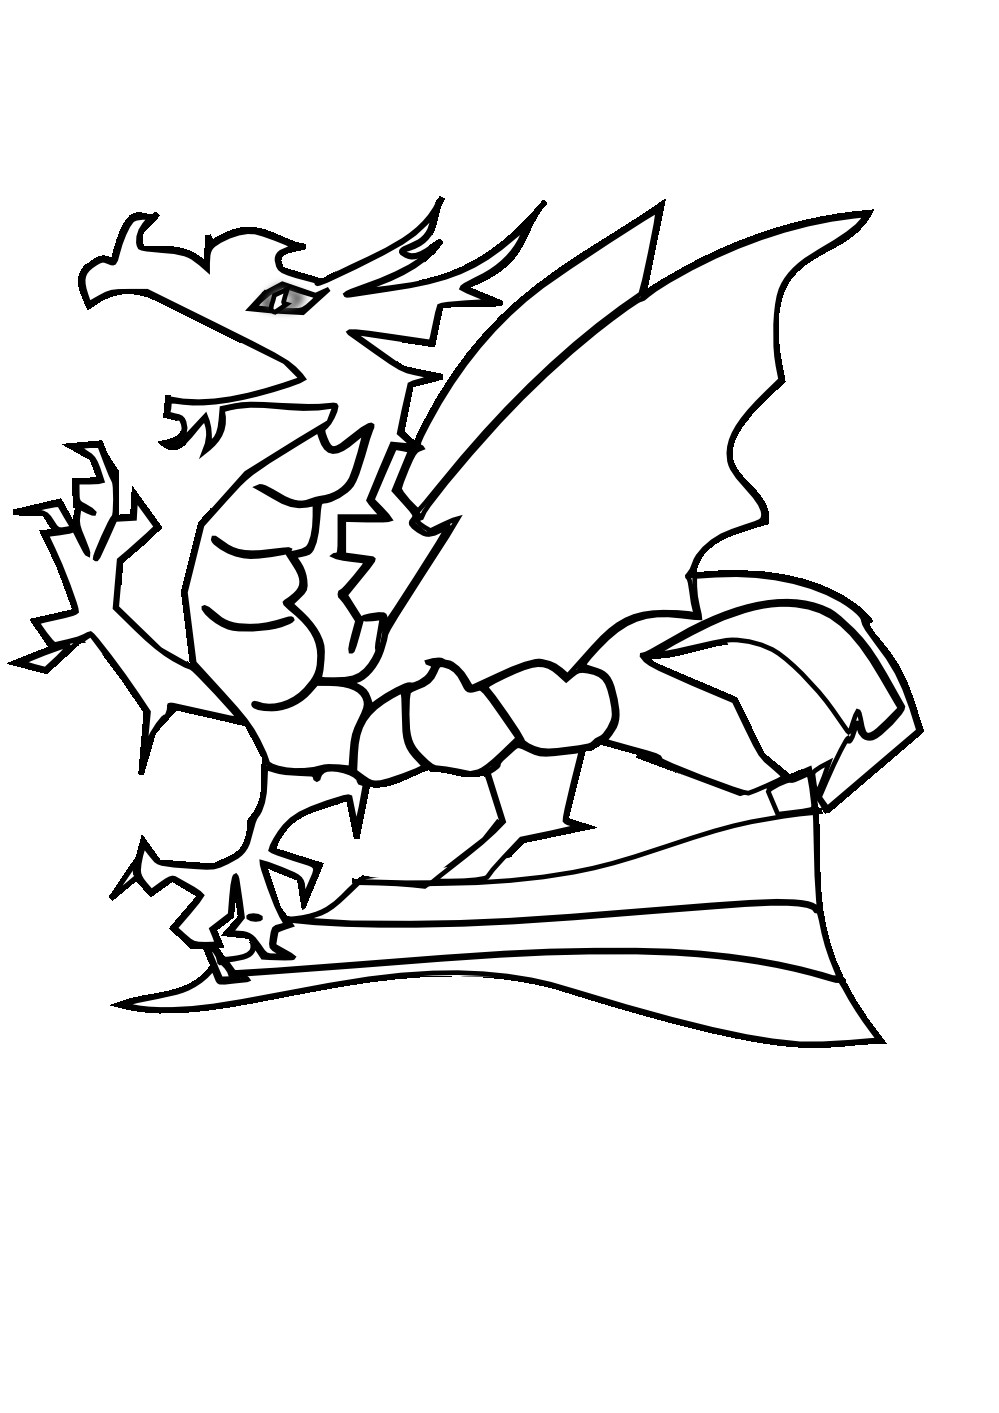 Baby Dragon Coloring Page
 Cute Baby Dragon Clipart